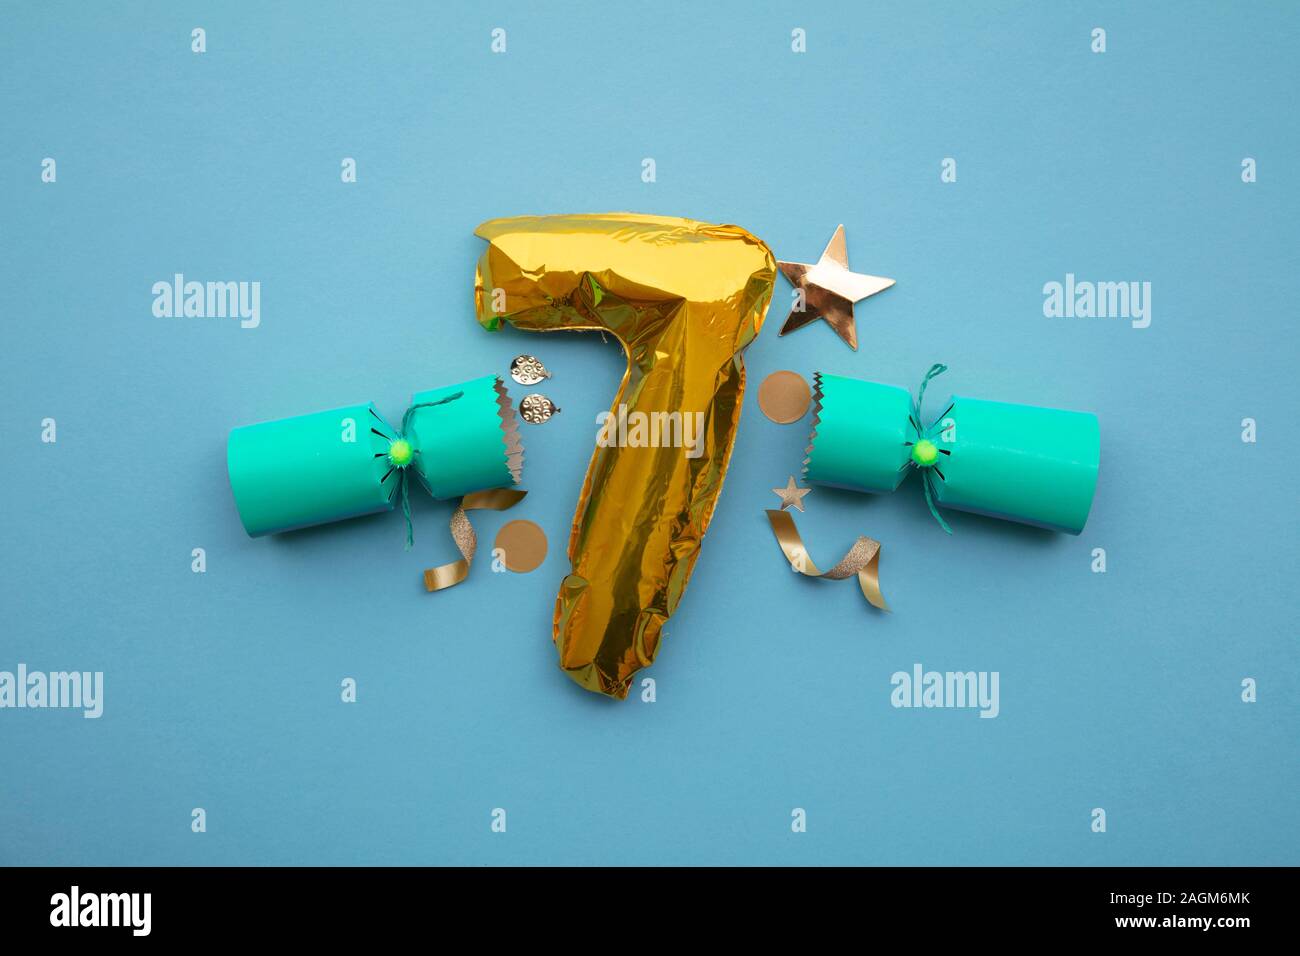 Christmas countdown. Gold number 7 with festive cristmas cracker decorations Stock Photo